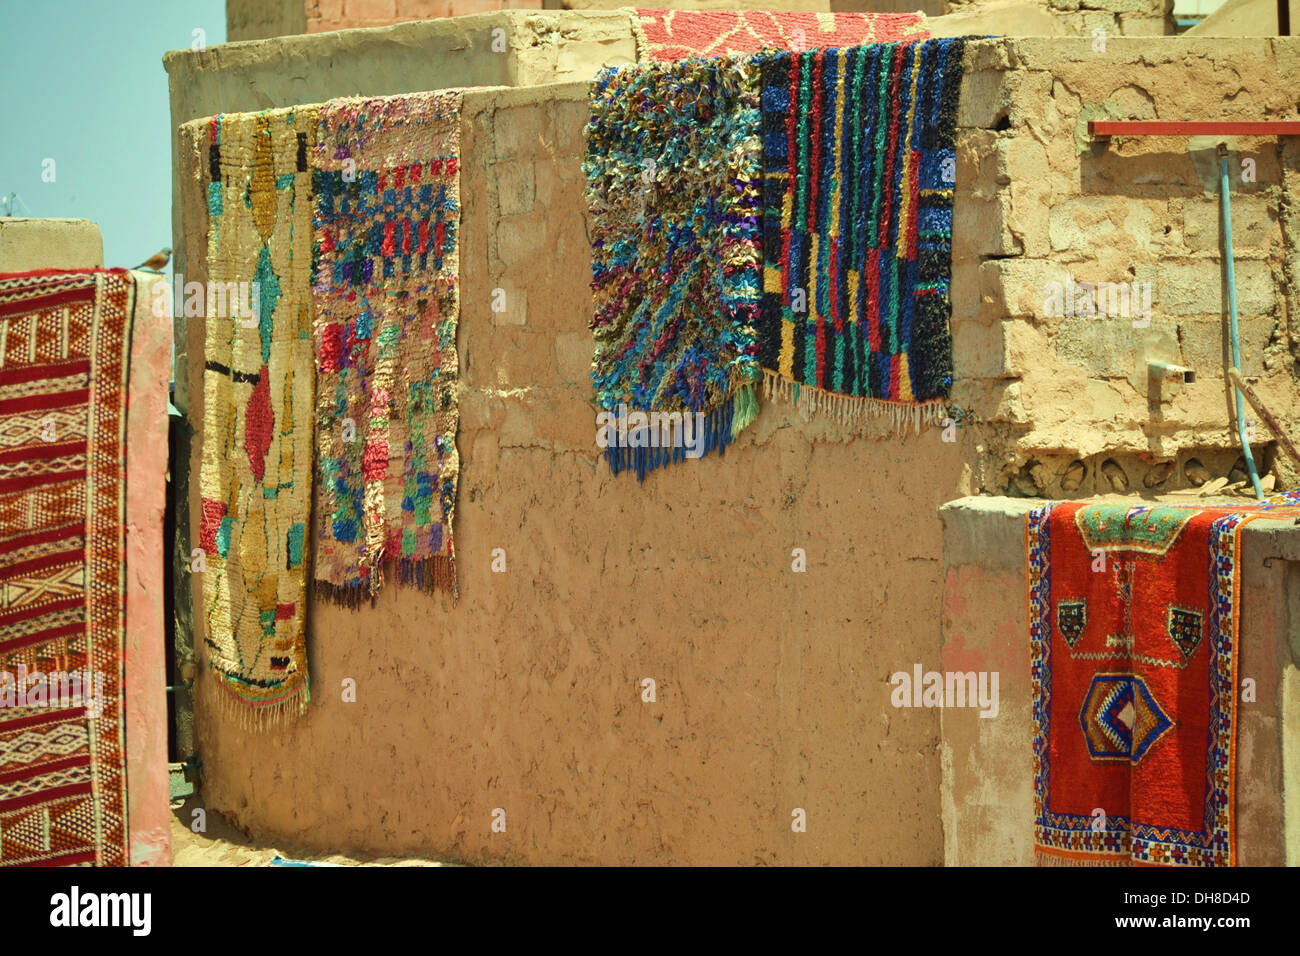 Carpets and rugs hanging out to dry in Marrakech Stock Photo